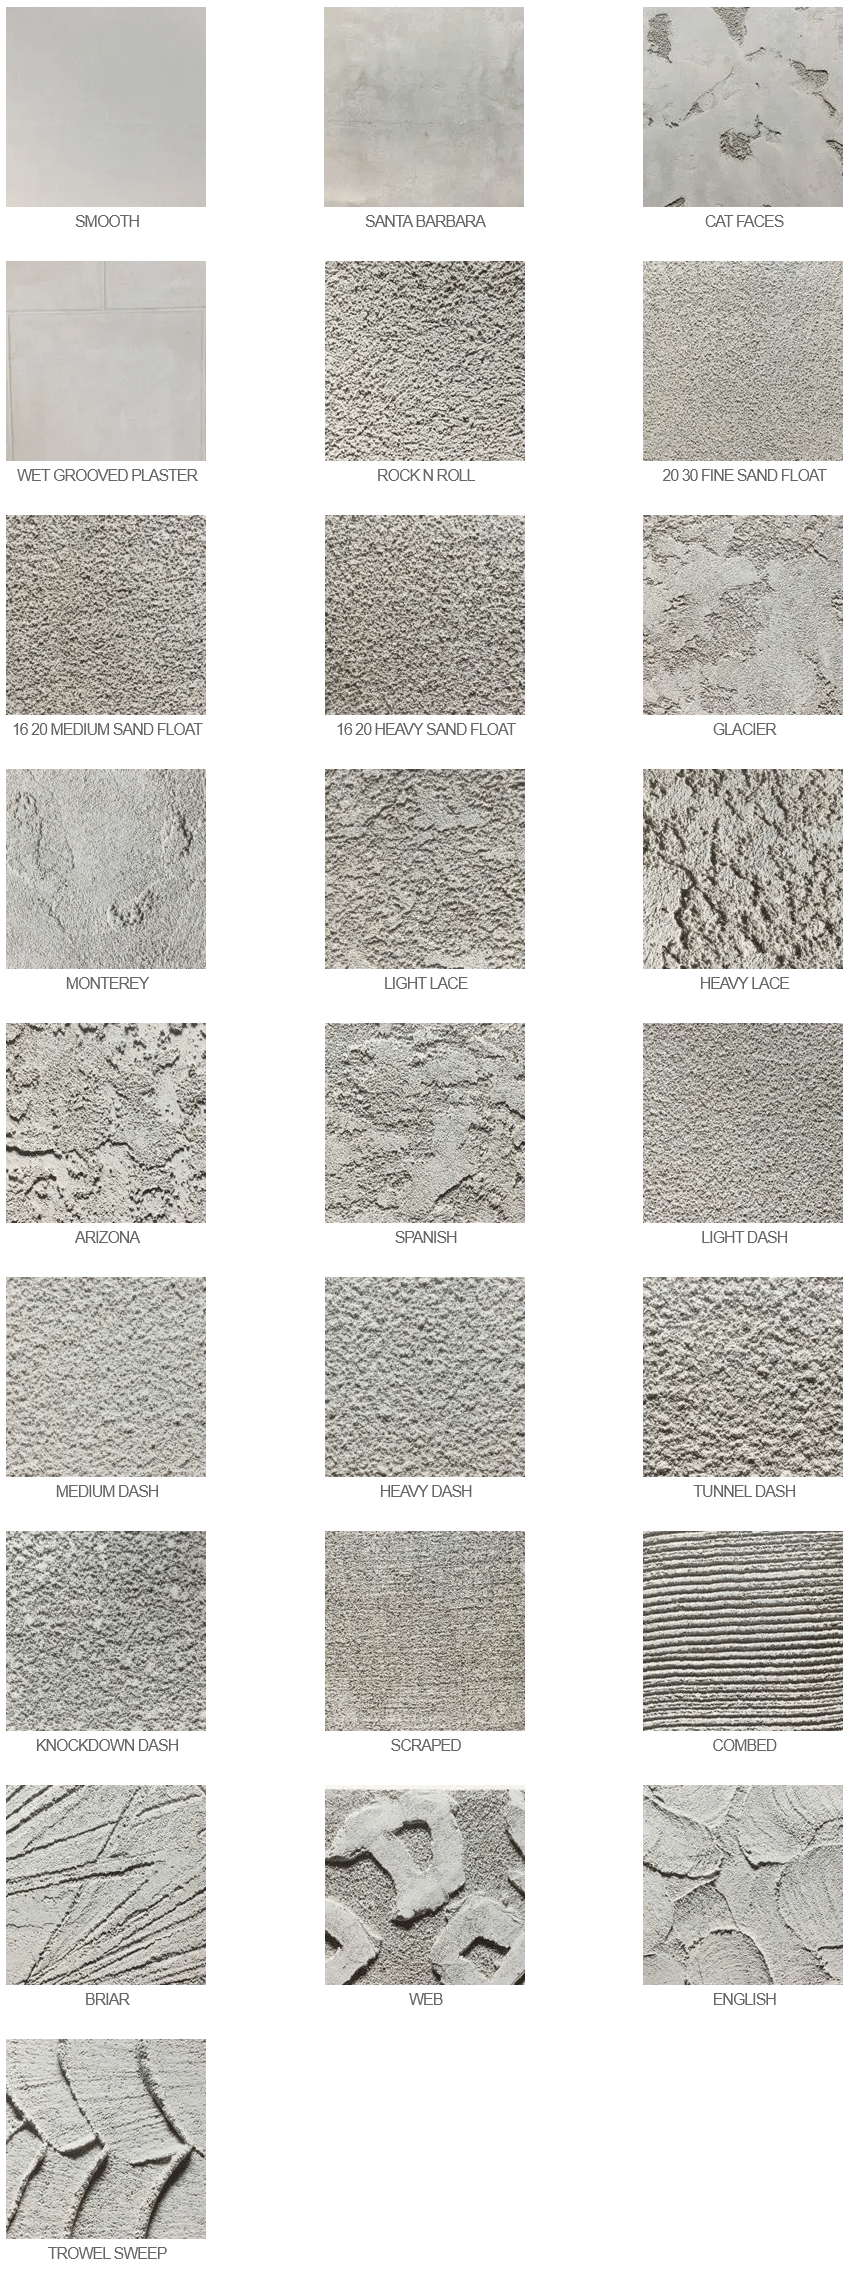 Photo with texture swatches of Hard Coat Stucco Options